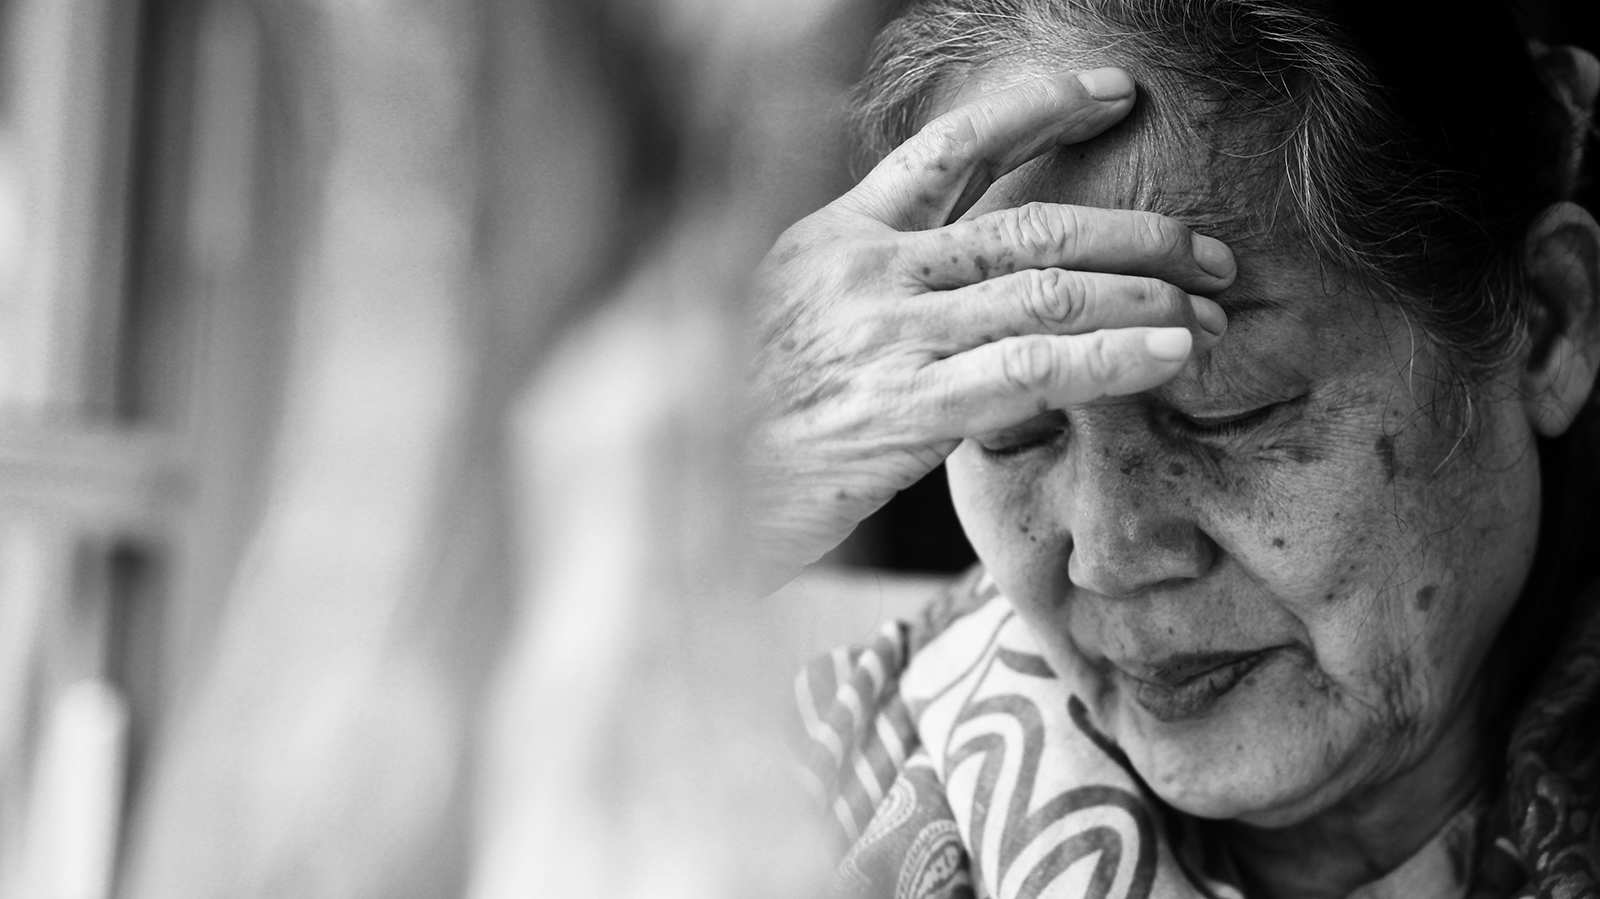 In Singapore, suicides among the elderly are at an all-time high. Here’s how you can help